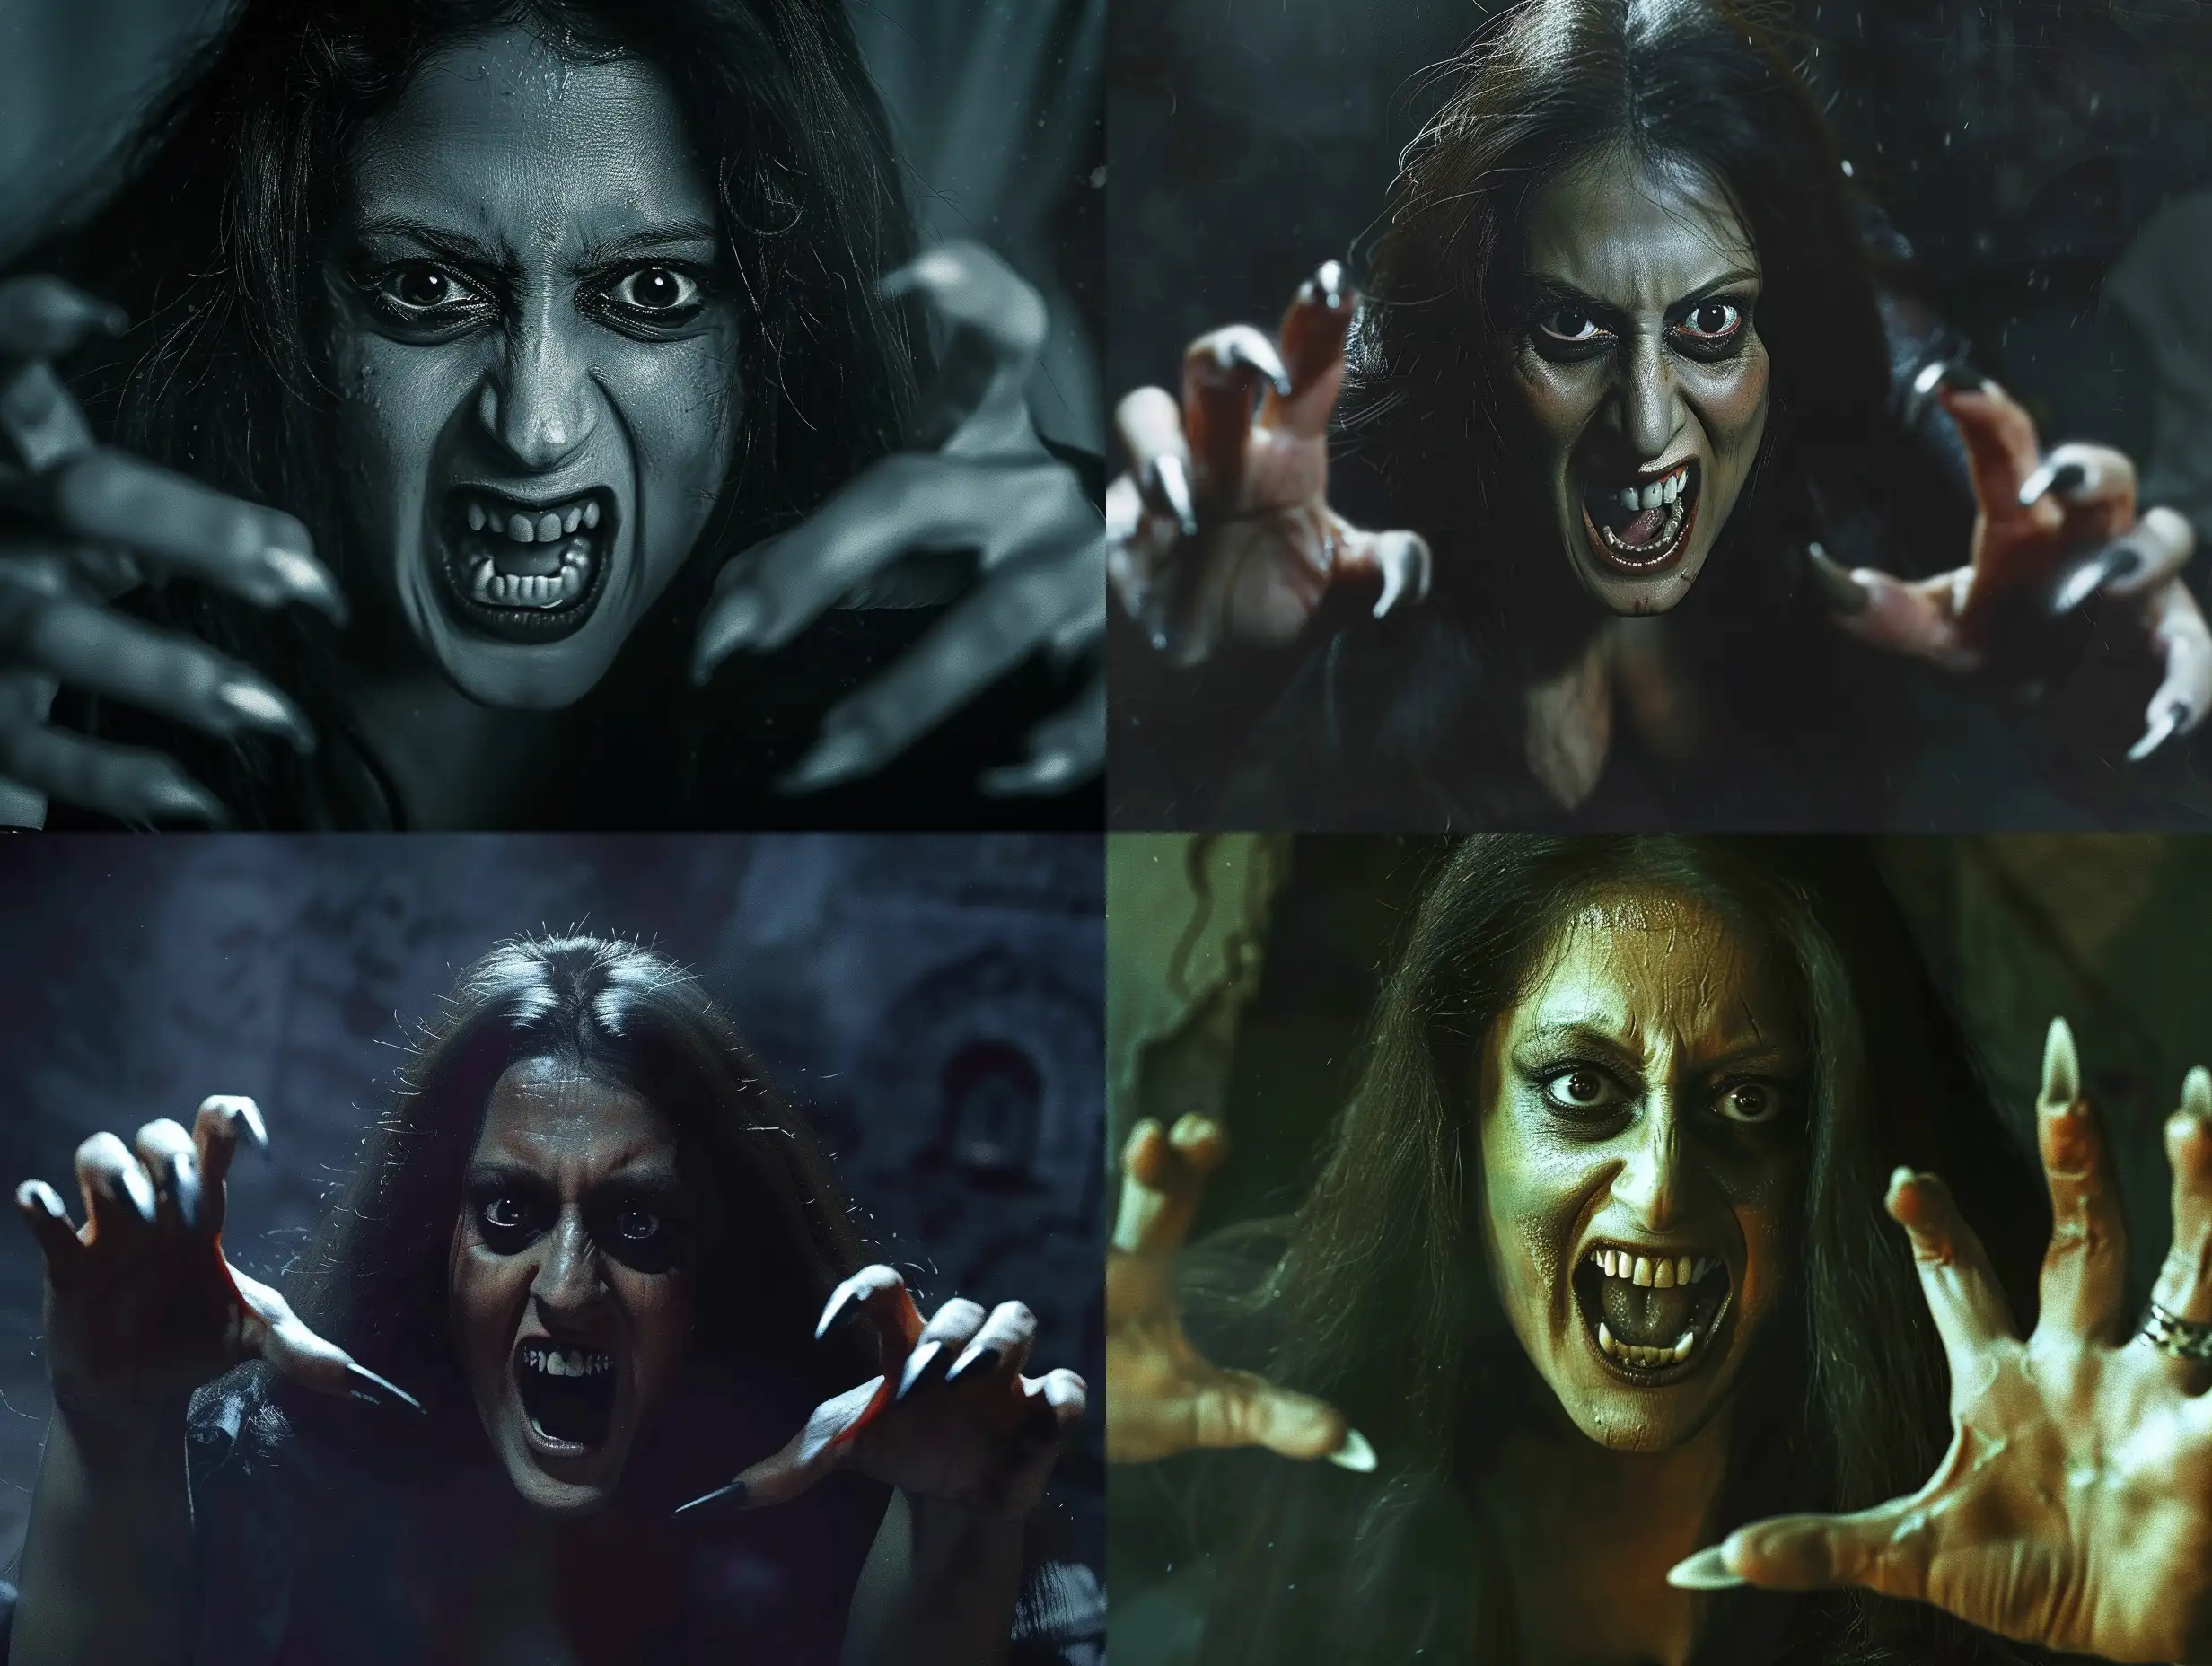 A photorealistic scene of a wild, monstrous vampire woman emerging from the darkness, with an eerie and haunting atmosphere. The vampire has extra long pointed fingernails on each hand, resembling the claws of a predator, and her mouth is threateningly open, revealing terrible teeth that look like fangs. She appears as if she climbed out of the grave, with hyper-realistic details such as full anatomical precision and highly textured features. The scene is cinematic, with intense and atmospheric lighting that emphasizes the smallest details, creating a realistic and aggressive dark atmosphere. The focus is on creating a high-quality, hyper-realistic portrayal of this undead creature, ensuring that every aspect is detailed and textured to convey a sense of horror and terror. The aim is to generate a night-time scene that is truly creepy, spooky, and terrifying while maintaining realistic anatomy and flawless execution